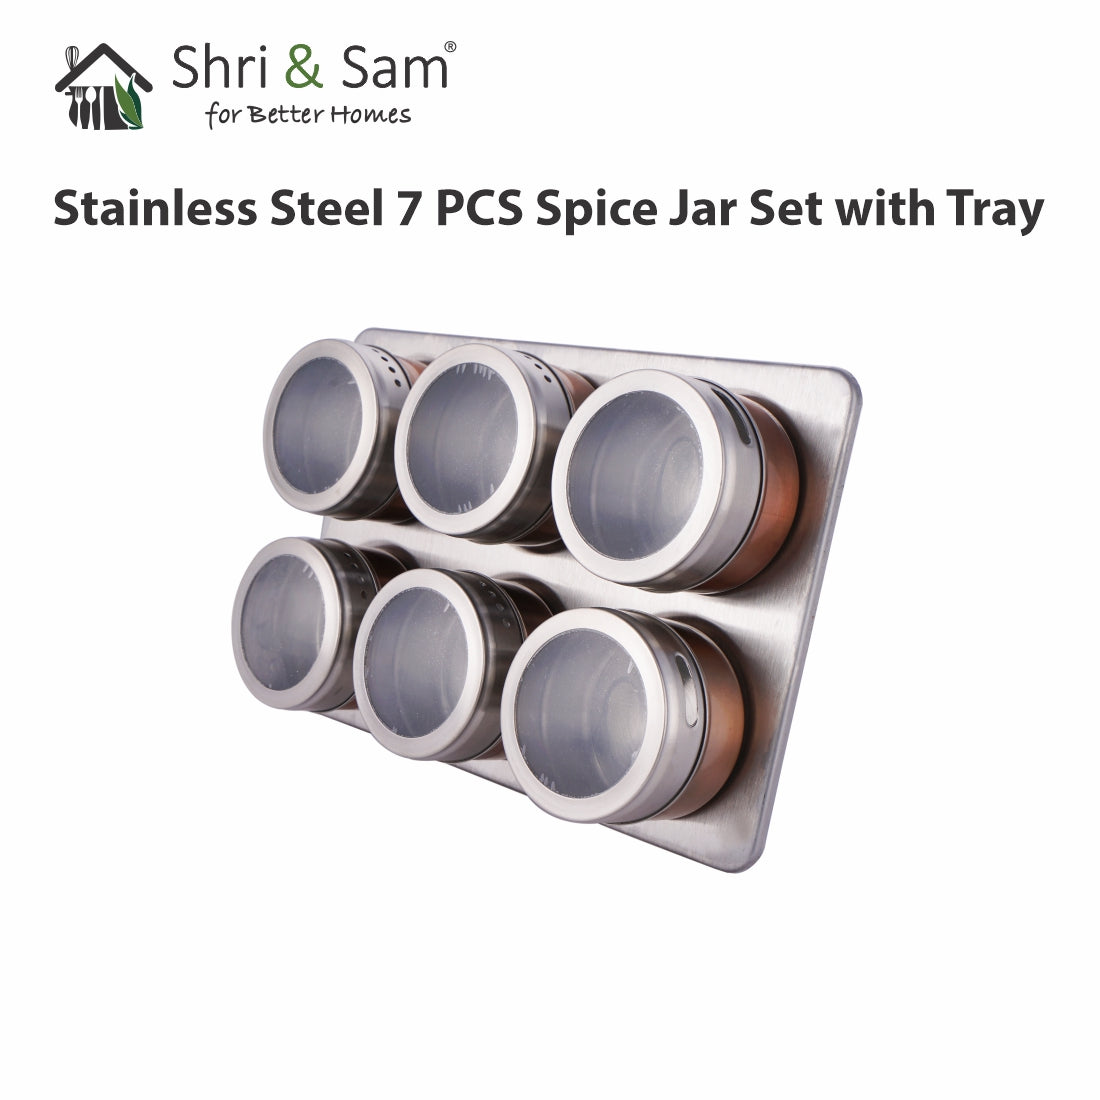 Stainless Steel 7 PCS Spice Jar Set with Tray